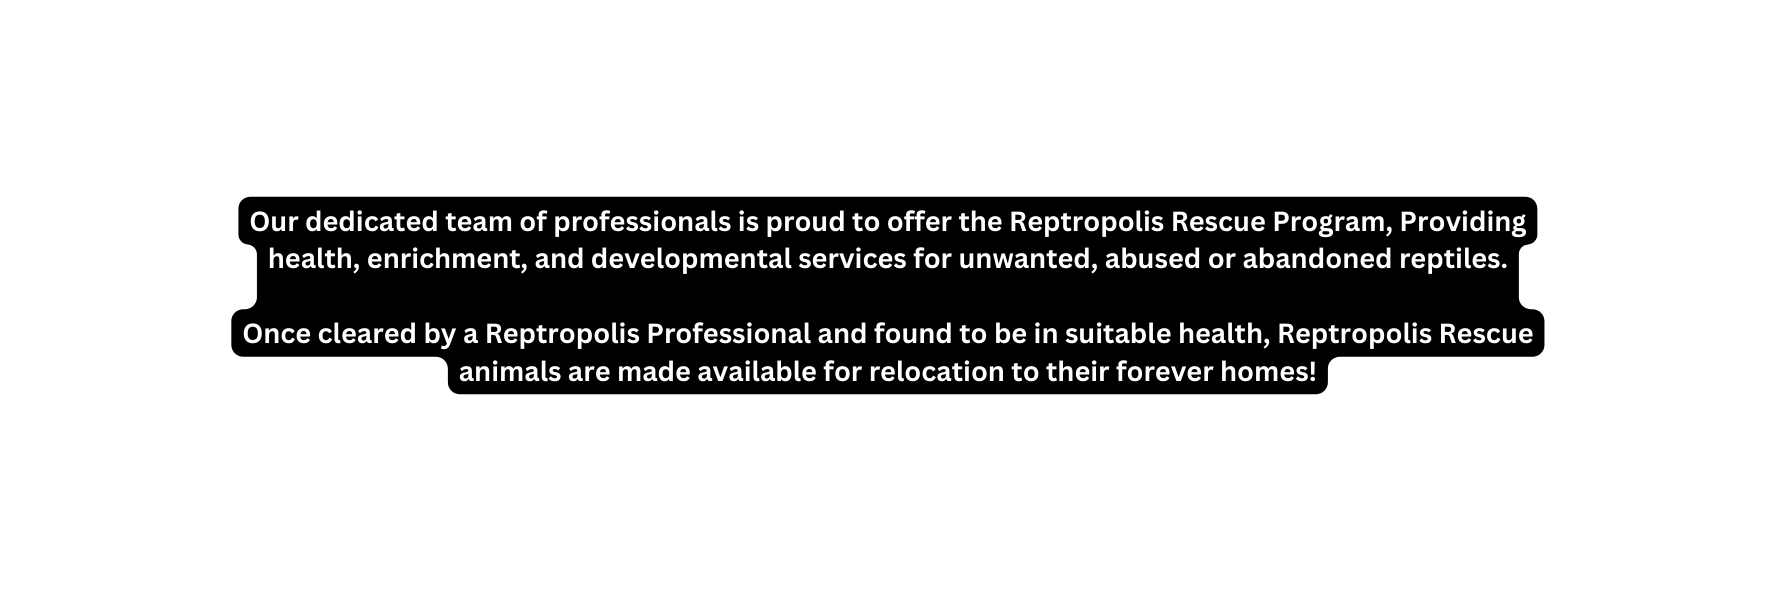 Our dedicated team of professionals is proud to offer the Reptropolis Rescue Program Providing health enrichment and developmental services for unwanted abused or abandoned reptiles Once cleared by a Reptropolis Professional and found to be in suitable health Reptropolis Rescue animals are made available for relocation to their forever homes